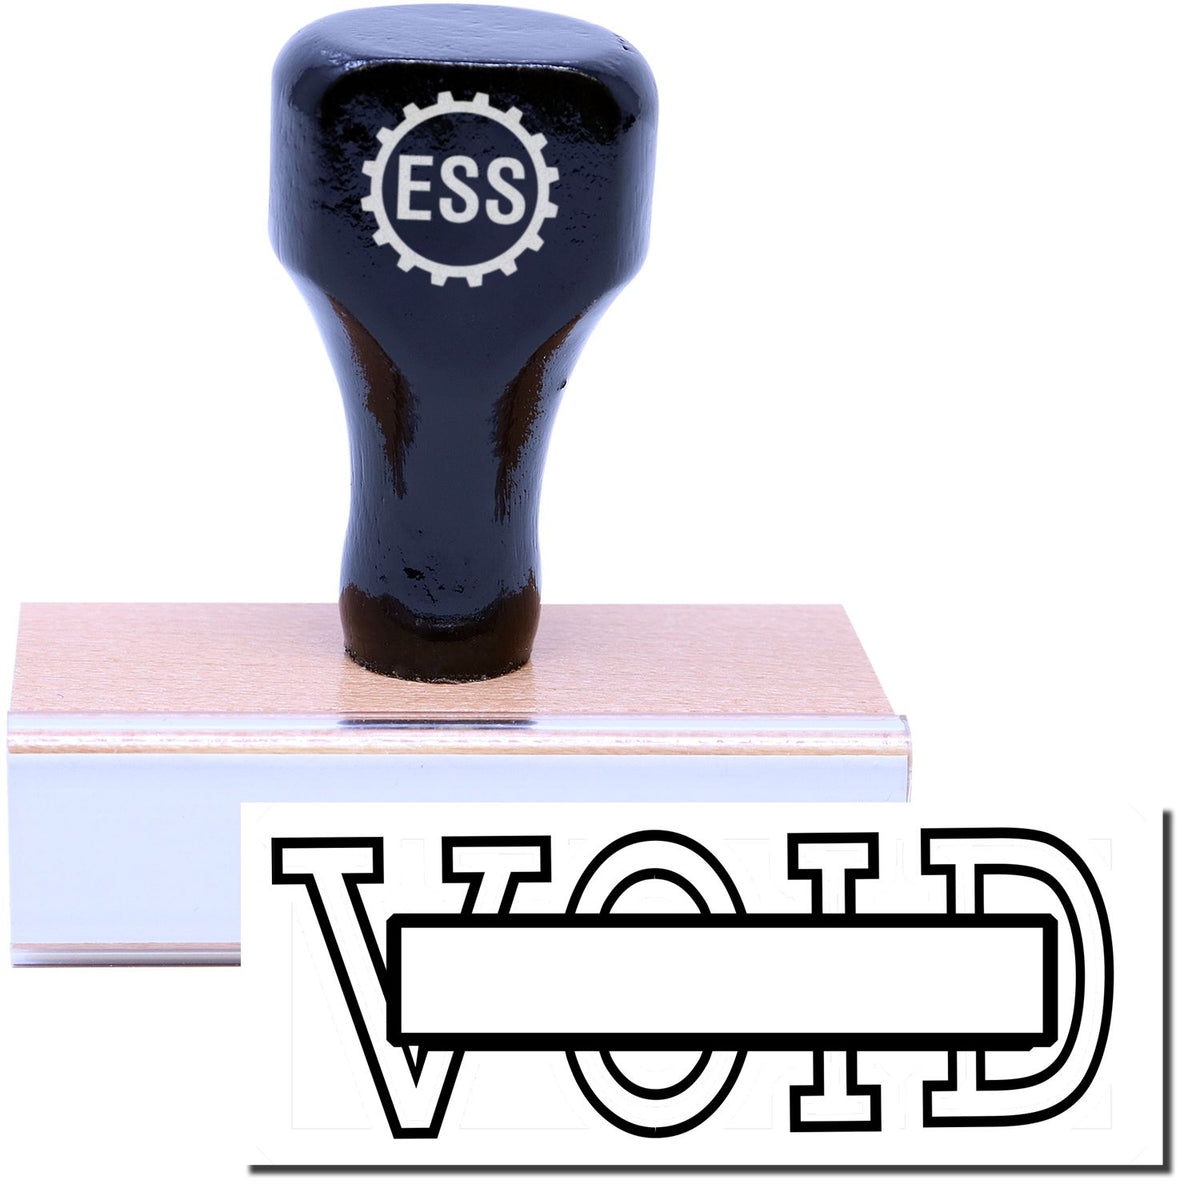 A stock office rubber stamp with a stamped image showing how the text &quot;VOID&quot; in a large outline font with a box in the center of the text is displayed after stamping.